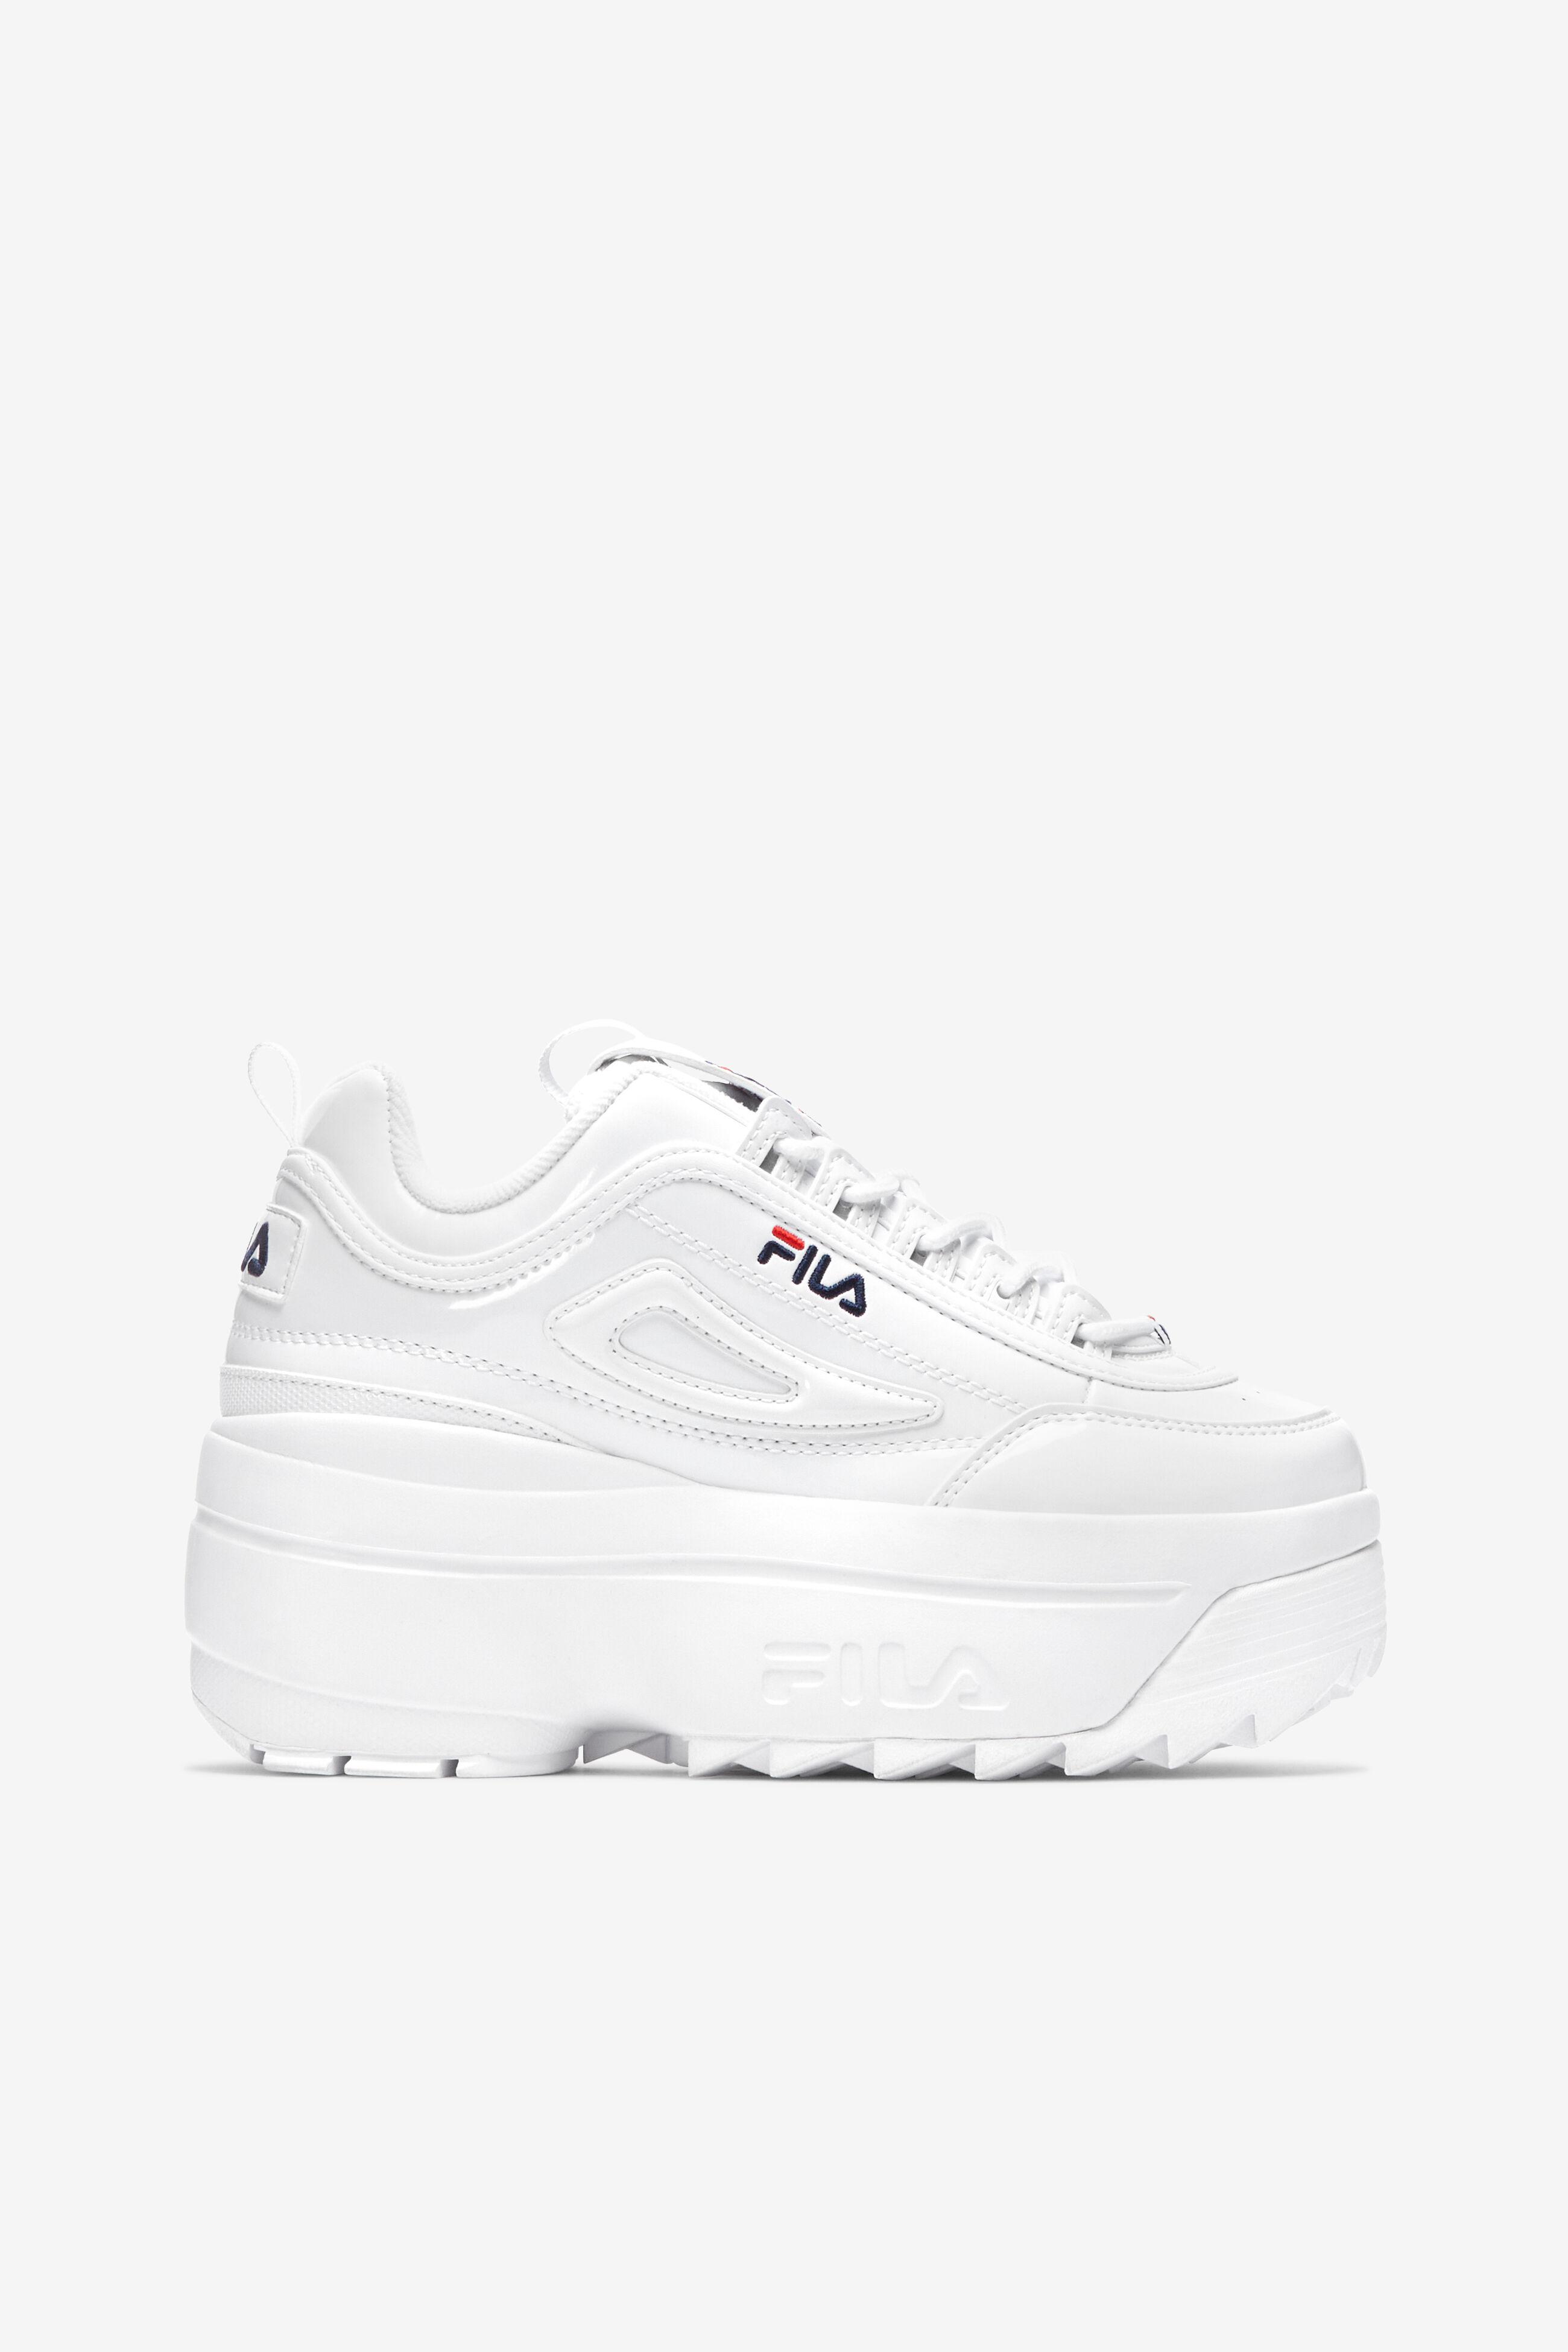 Fila Leather Disruptor 2 Wedge Patent in White | Lyst